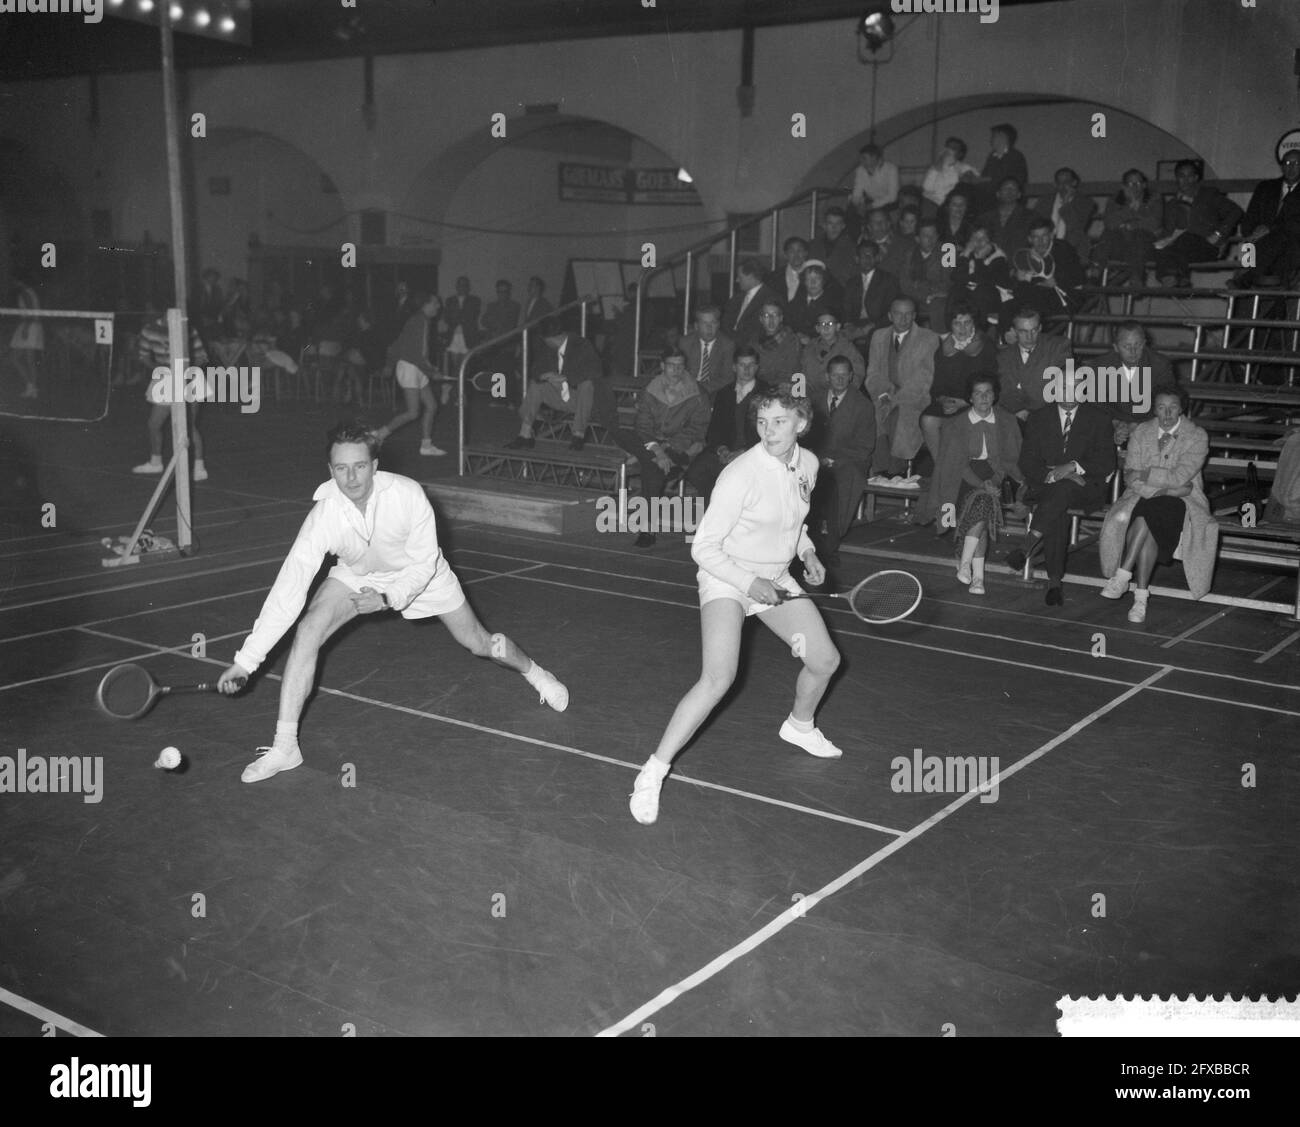 International badminton championship at Haarlem Ms. A. Marshall and J. Best,  February 14, 1960, badminton, sport, The Netherlands, 20th century press  agency photo, news to remember, documentary, historic photography  1945-1990, visual stories,